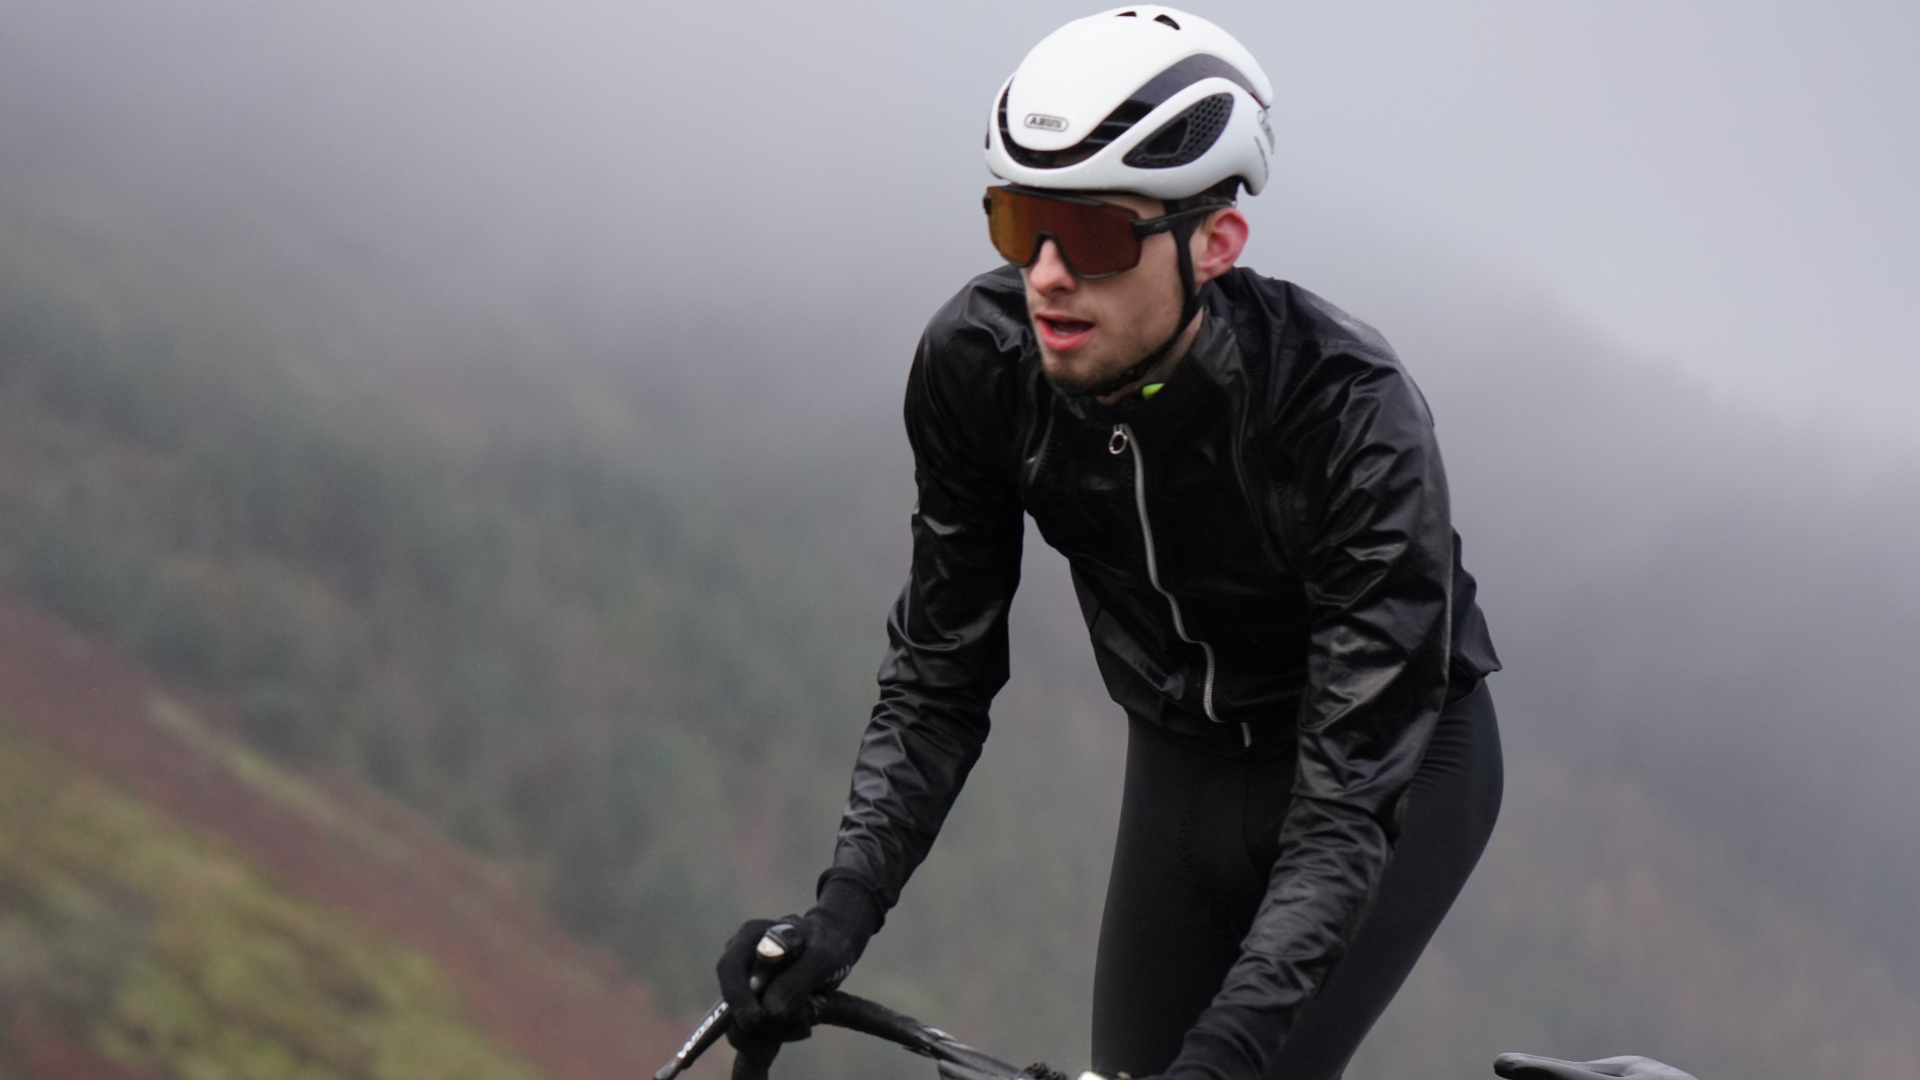 Kit Care – Re-Waterproofing and Restoring Waterproof Cycling Jackets